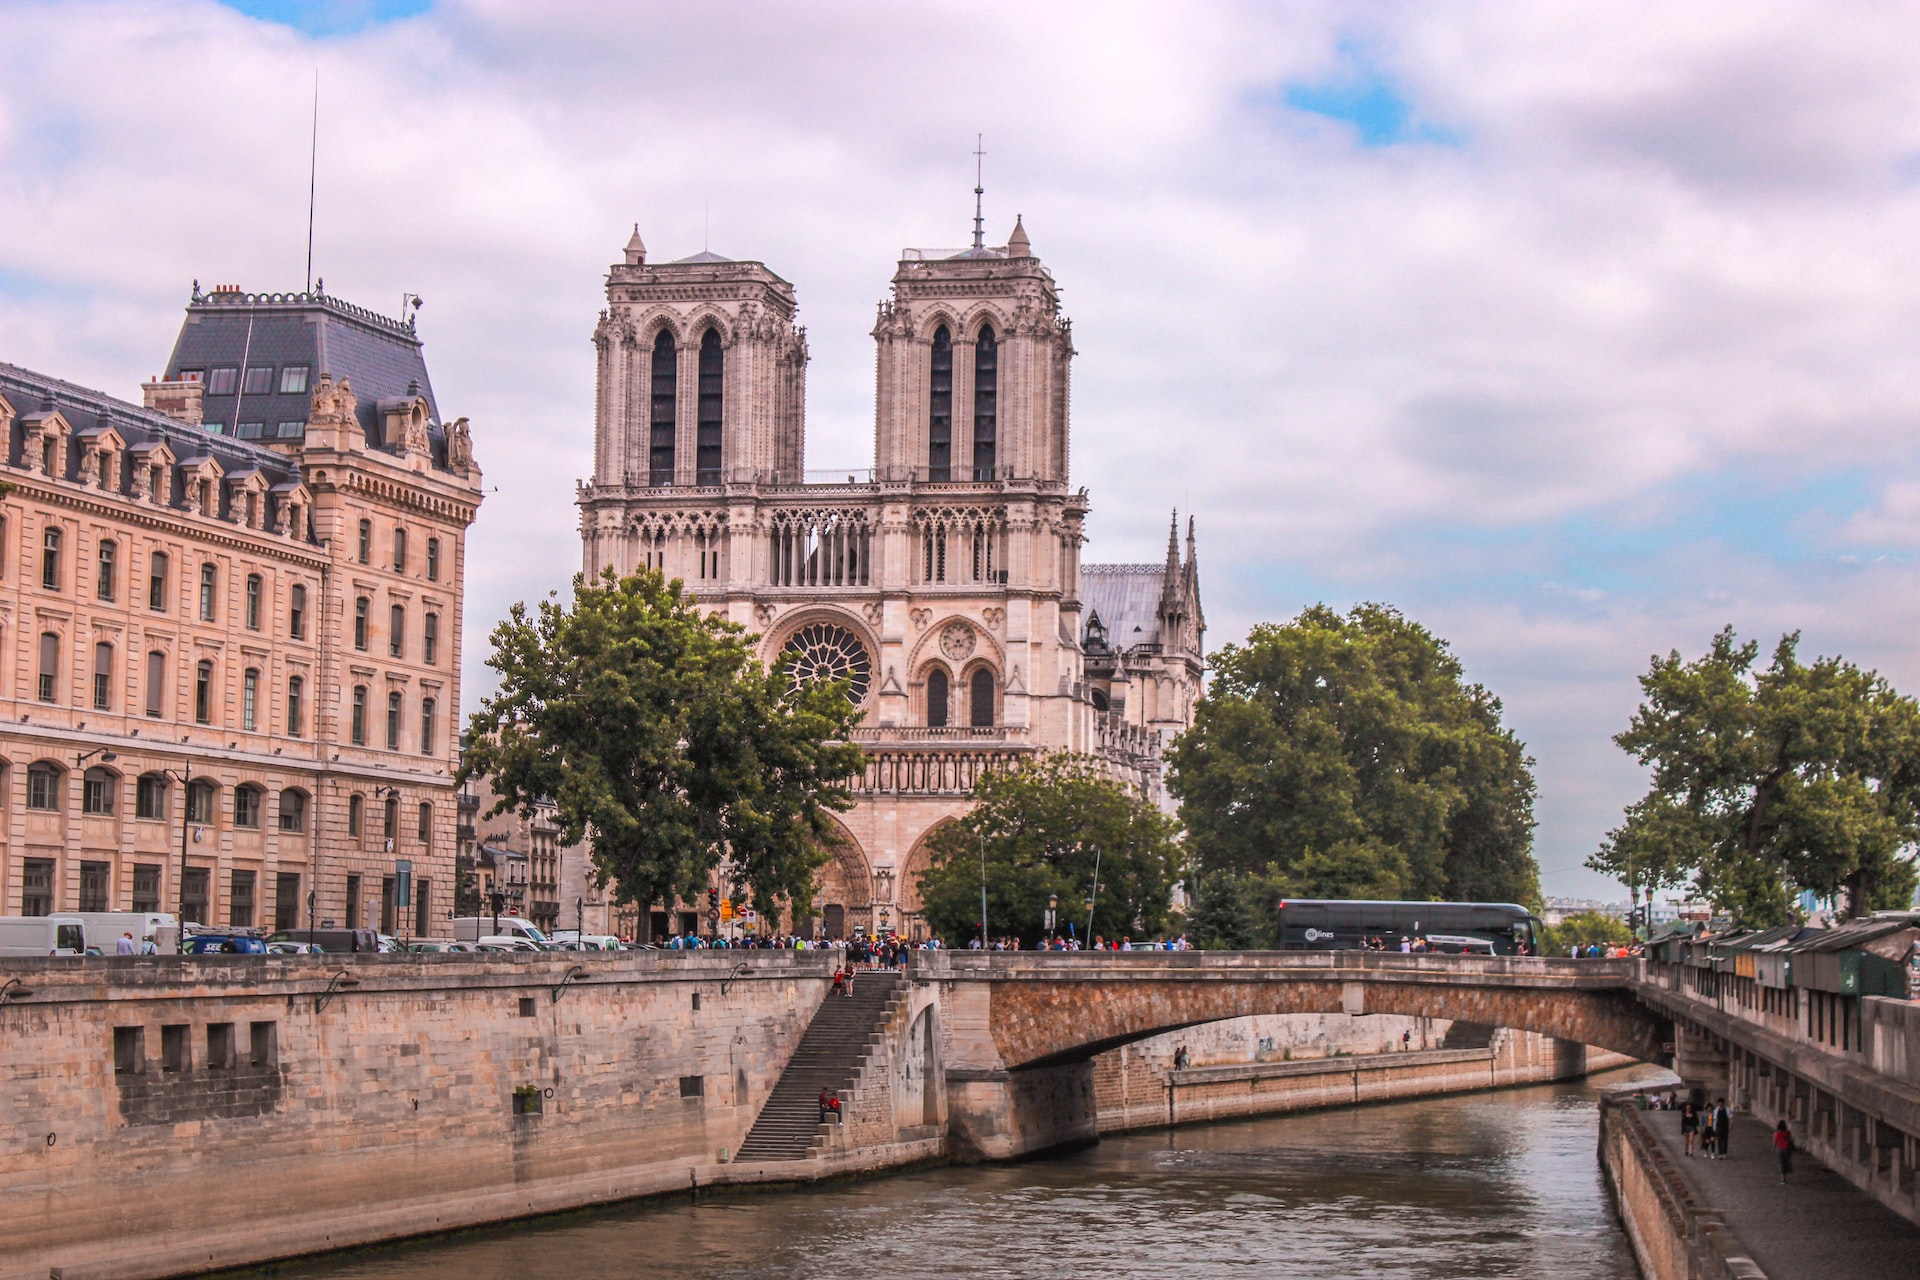 A view of the Seine River and the Notre Dame Cathedral.